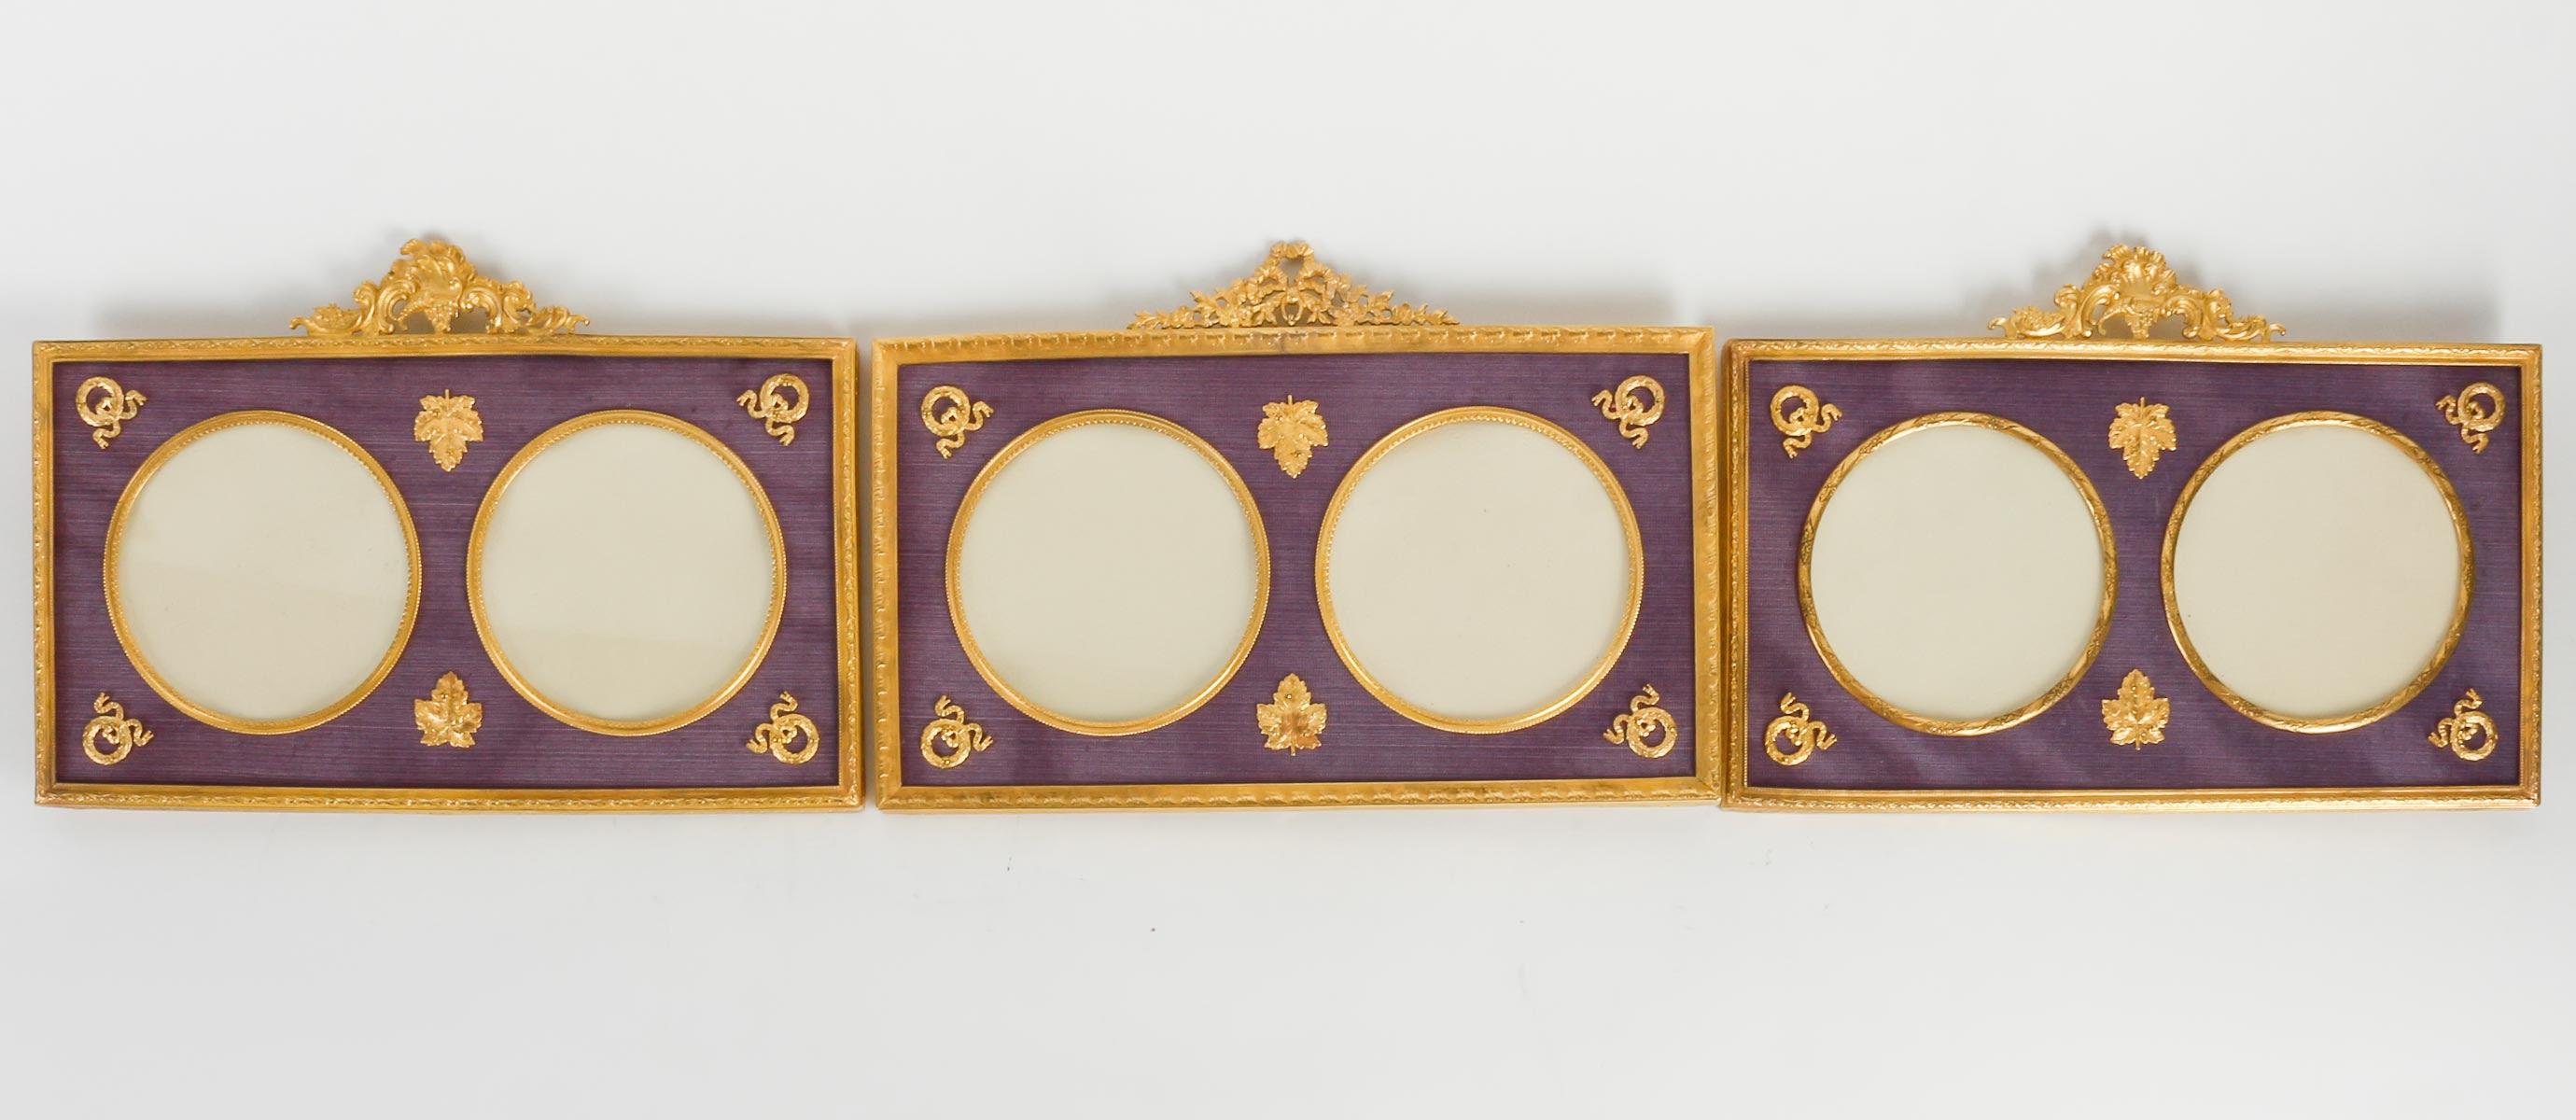 Suite of 3 Photo Frames for 2 Photos each in Gilt Bronze and Fabric, 19th Century, Louis XVI Style.

Suite of 3 Photo Frames for two photos each in the Louis XVI style, gilt bronze and violet fabric, 19th century, Napoleon III period.
H: 18cm, W: